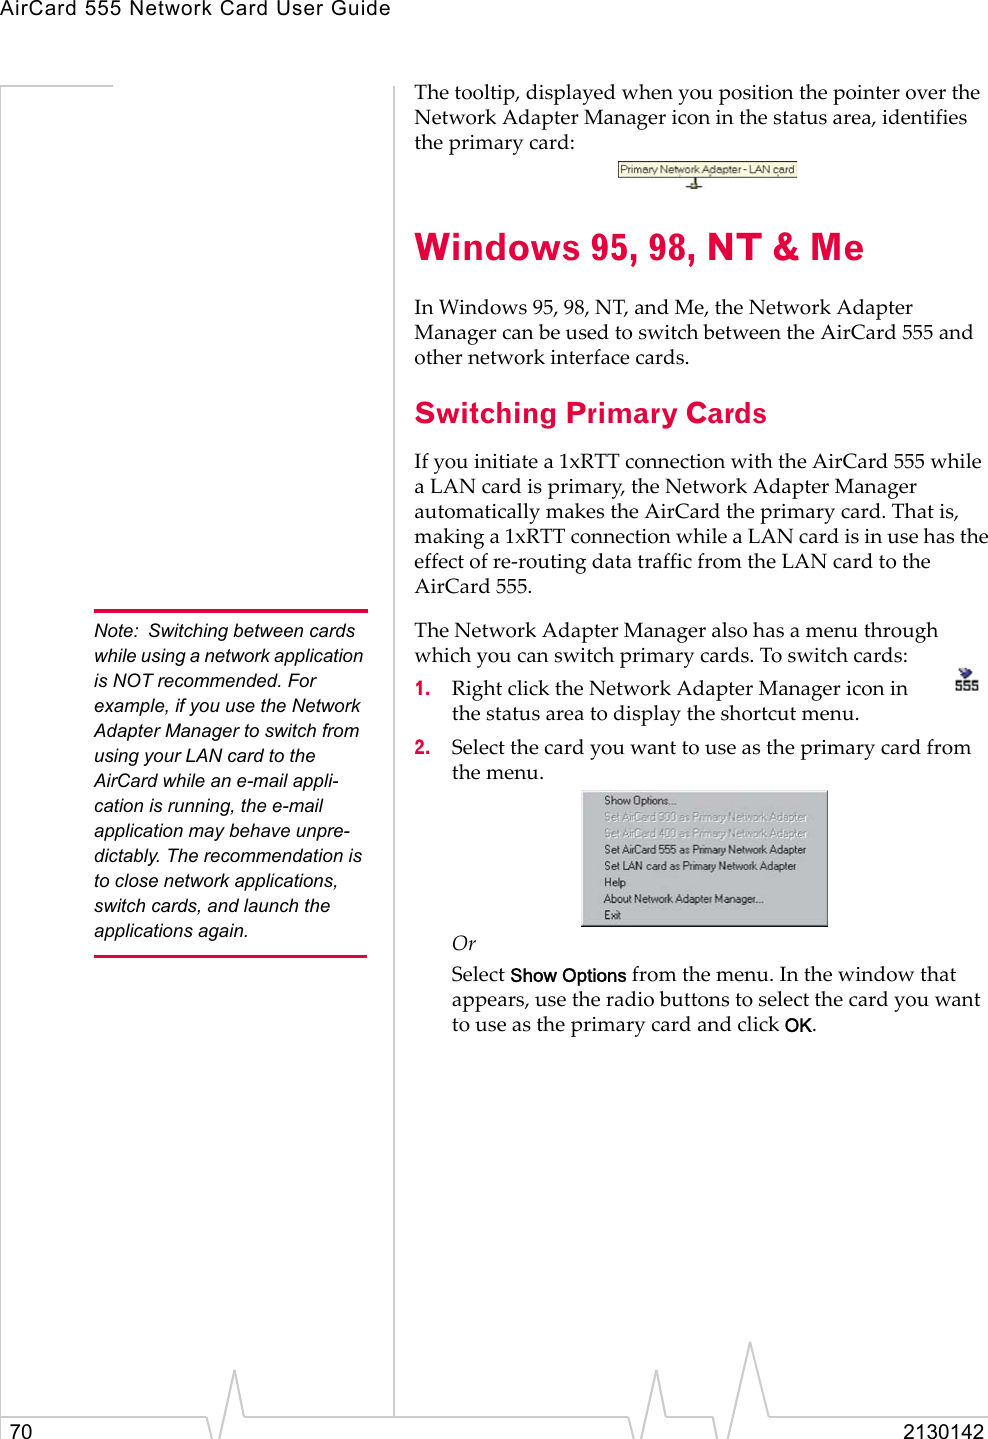 AirCard 555 Network Card User Guide70 2130142The tooltip, displayed when you position the pointer over the Network Adapter Manager icon in the status area, identifies the primary card:Windows 95, 98, NT &amp; MeIn Windows 95, 98, NT, and Me, the Network Adapter Manager can be used to switch between the AirCard 555 and other network interface cards. Switching Primary CardsIf you initiate a 1xRTT connection with the AirCard 555 while a LAN card is primary, the Network Adapter Manager automatically makes the AirCard the primary card. That is, making a 1xRTT connection while a LAN card is in use has the effect of re-routing data traffic from the LAN card to the AirCard 555.Note: Switching between cards while using a network application is NOT recommended. For example, if you use the Network Adapter Manager to switch from using your LAN card to the AirCard while an e-mail appli-cation is running, the e-mail application may behave unpre-dictably. The recommendation is to close network applications, switch cards, and launch the applications again.The Network Adapter Manager also has a menu through which you can switch primary cards. To switch cards:1. Right click the Network Adapter Manager icon in the status area to display the shortcut menu.2. Select the card you want to use as the primary card from the menu.Or Select Show Options from the menu. In the window that appears, use the radio buttons to select the card you want to use as the primary card and click OK.